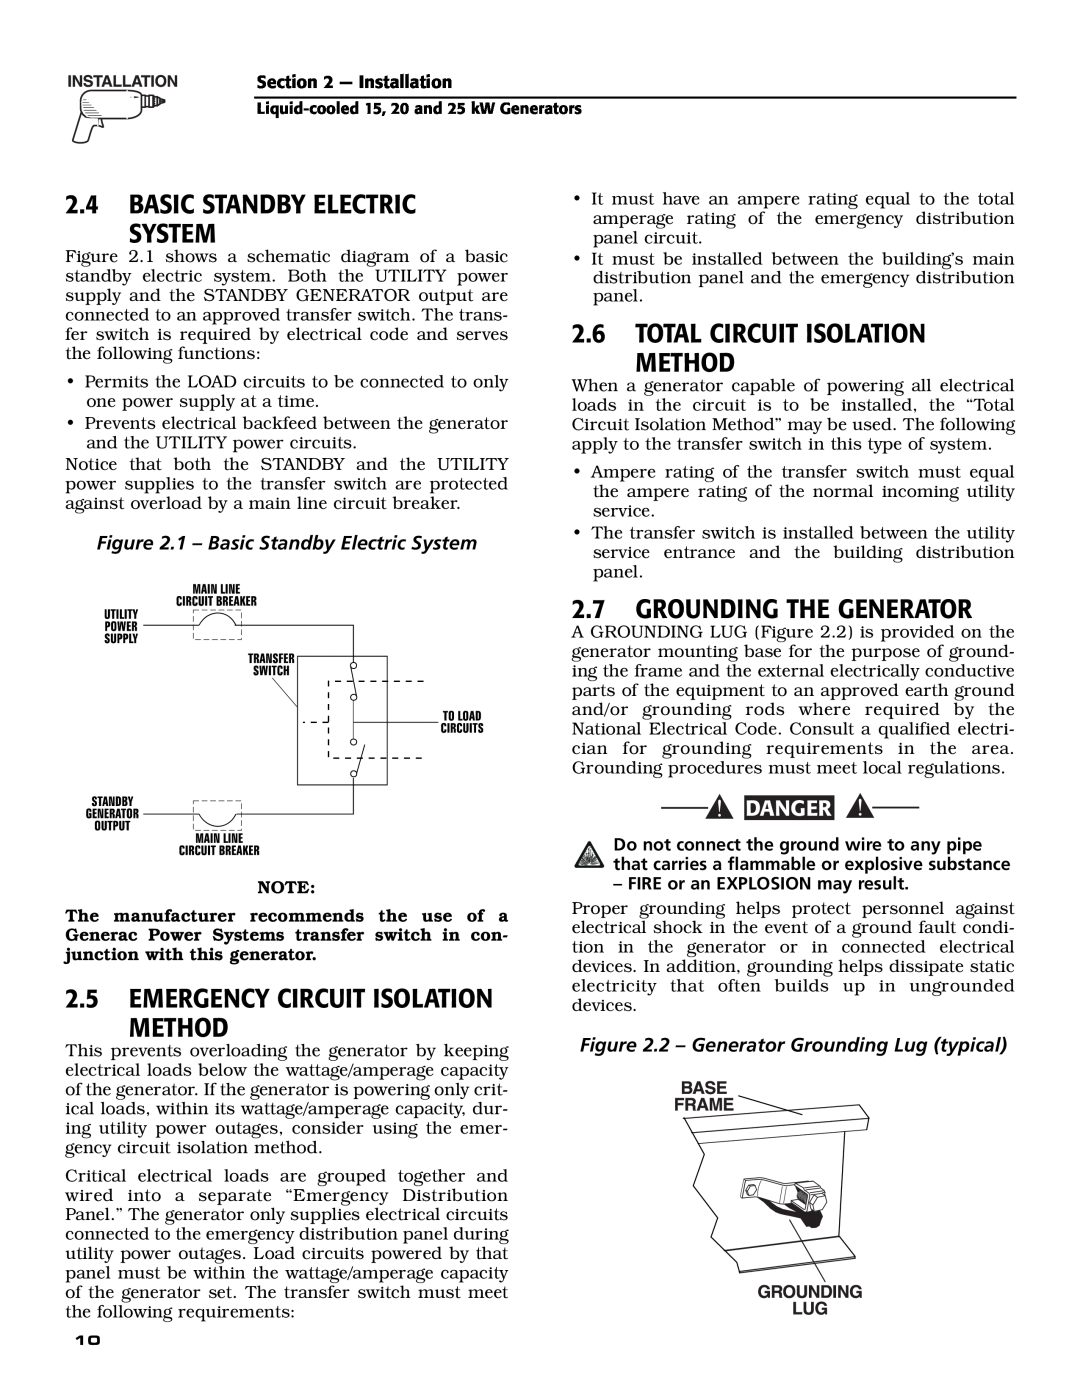 Generac 005028-0 Basic Standby Electric System, Total Circuit Isolation Method, Grounding The Generator, Danger 